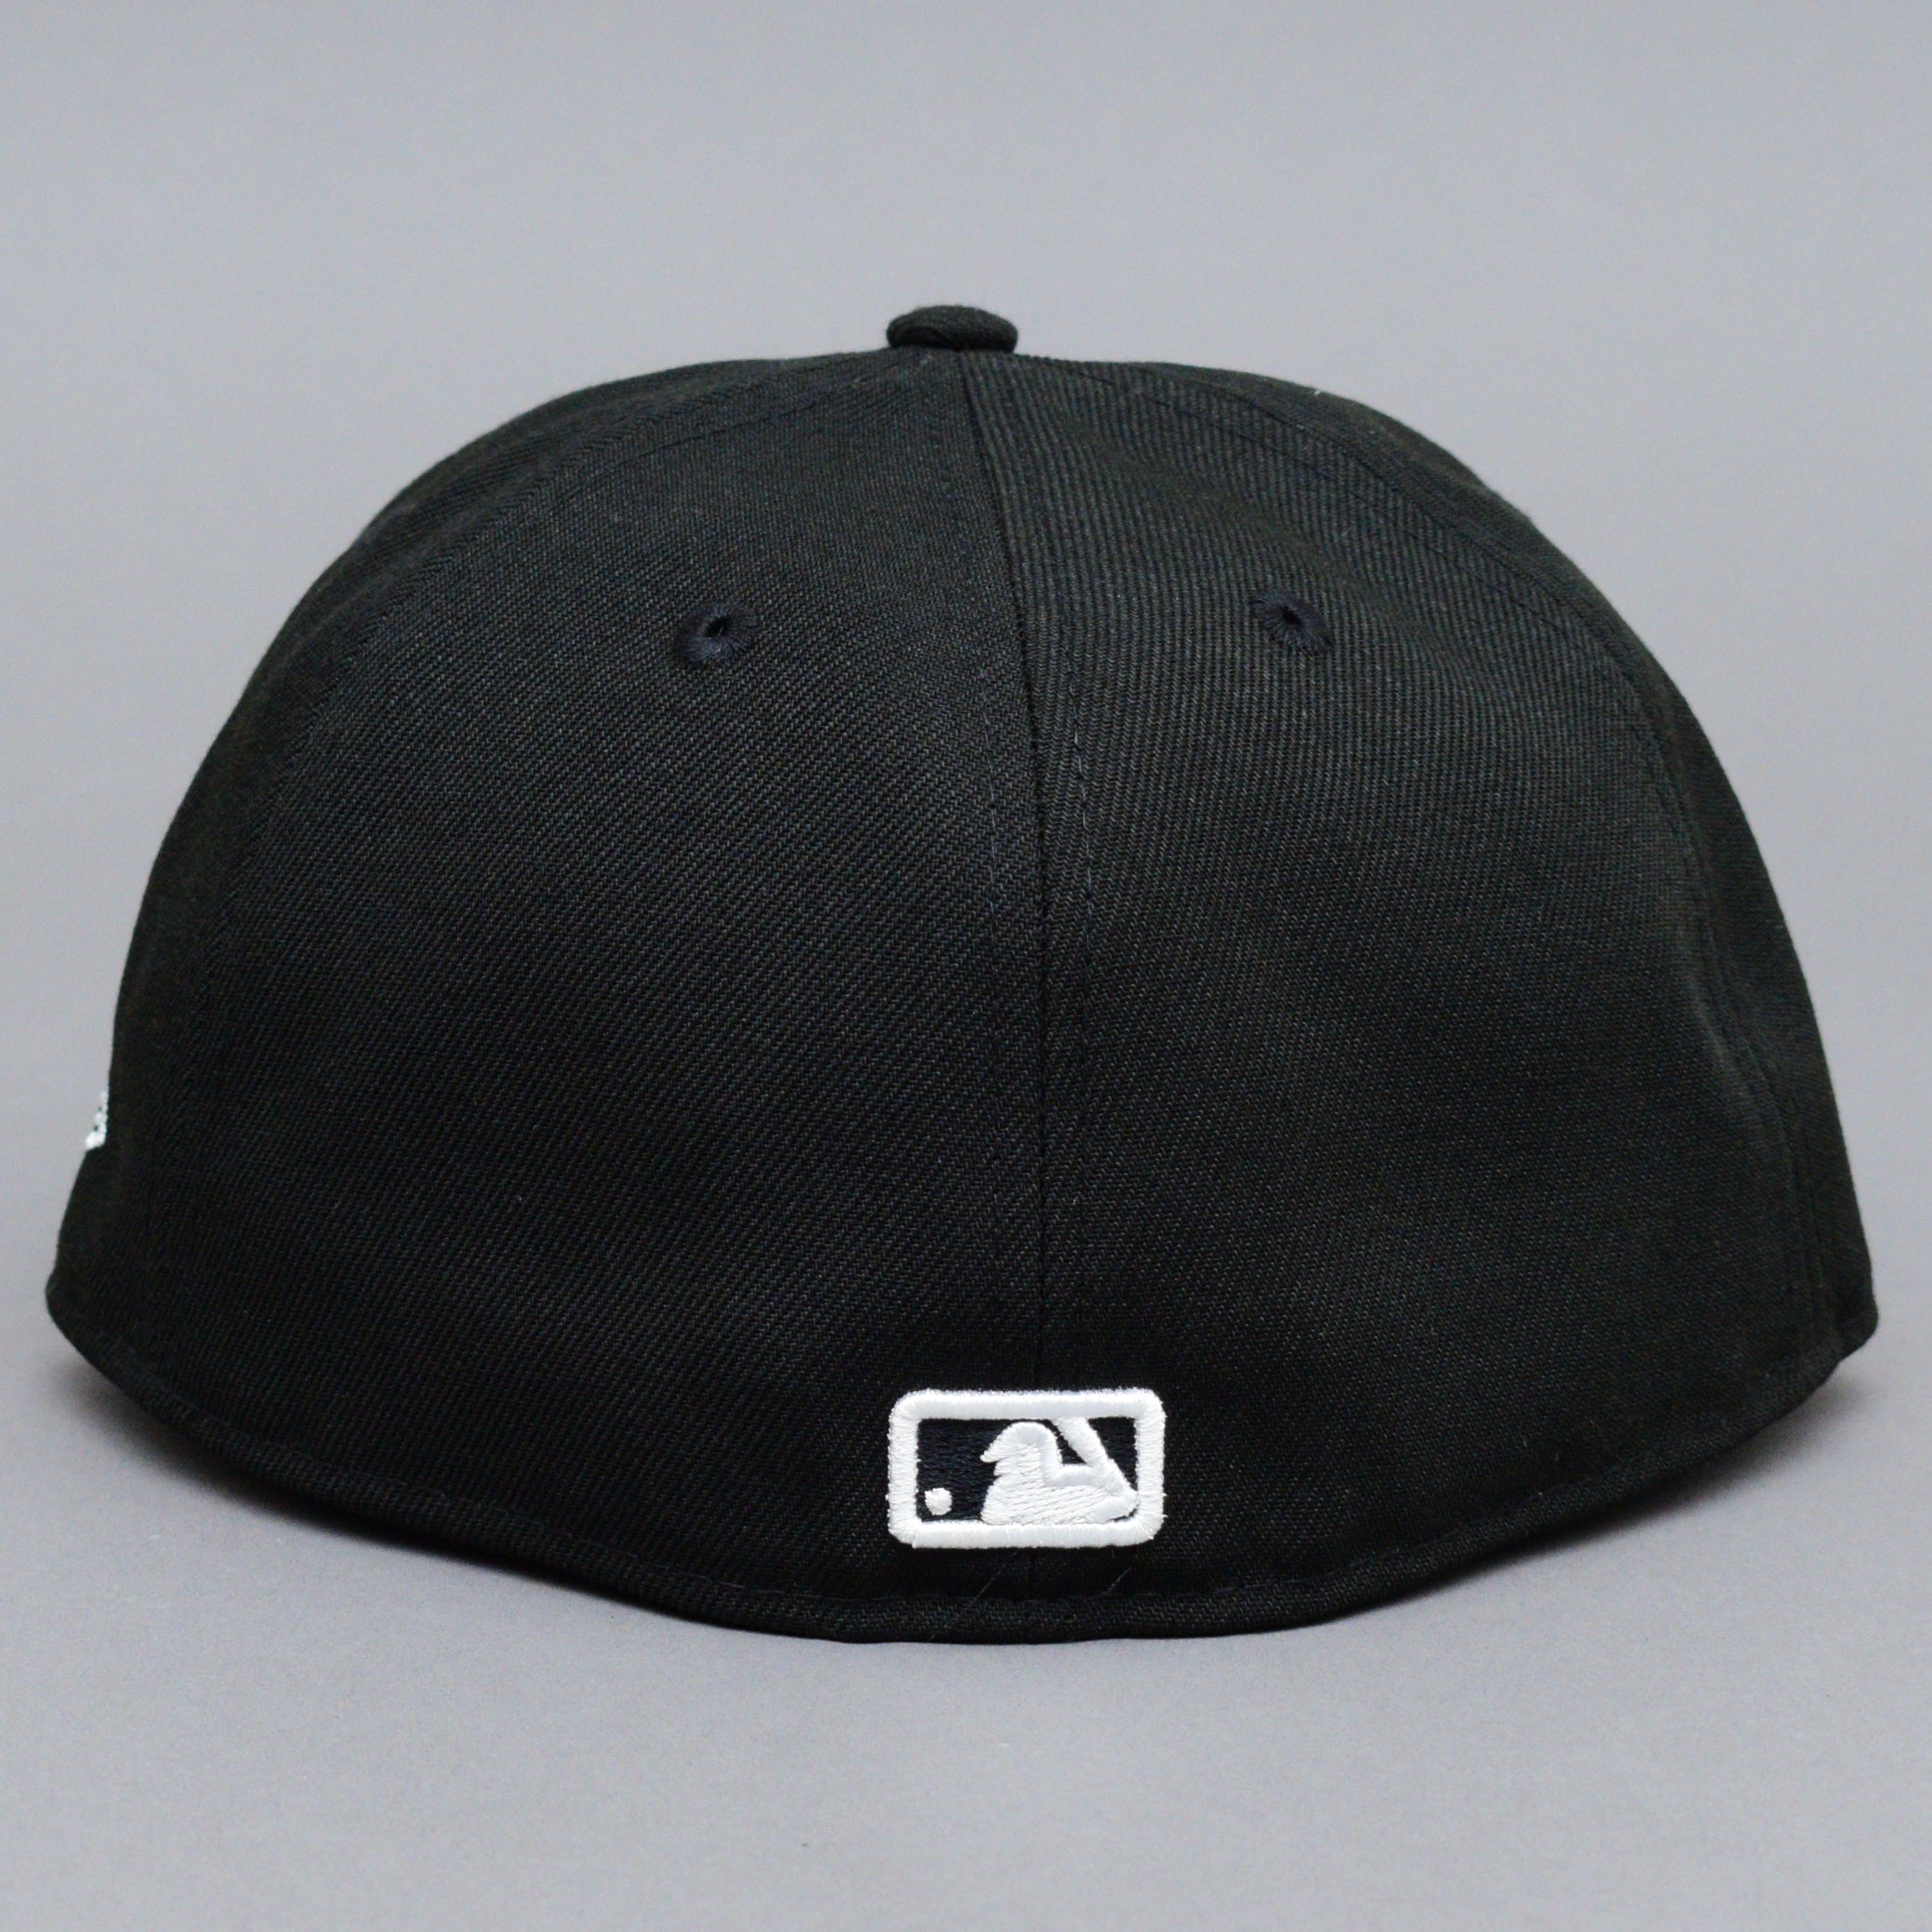 New Era - NY Yankees 59Fifty Essential - Fitted - Black